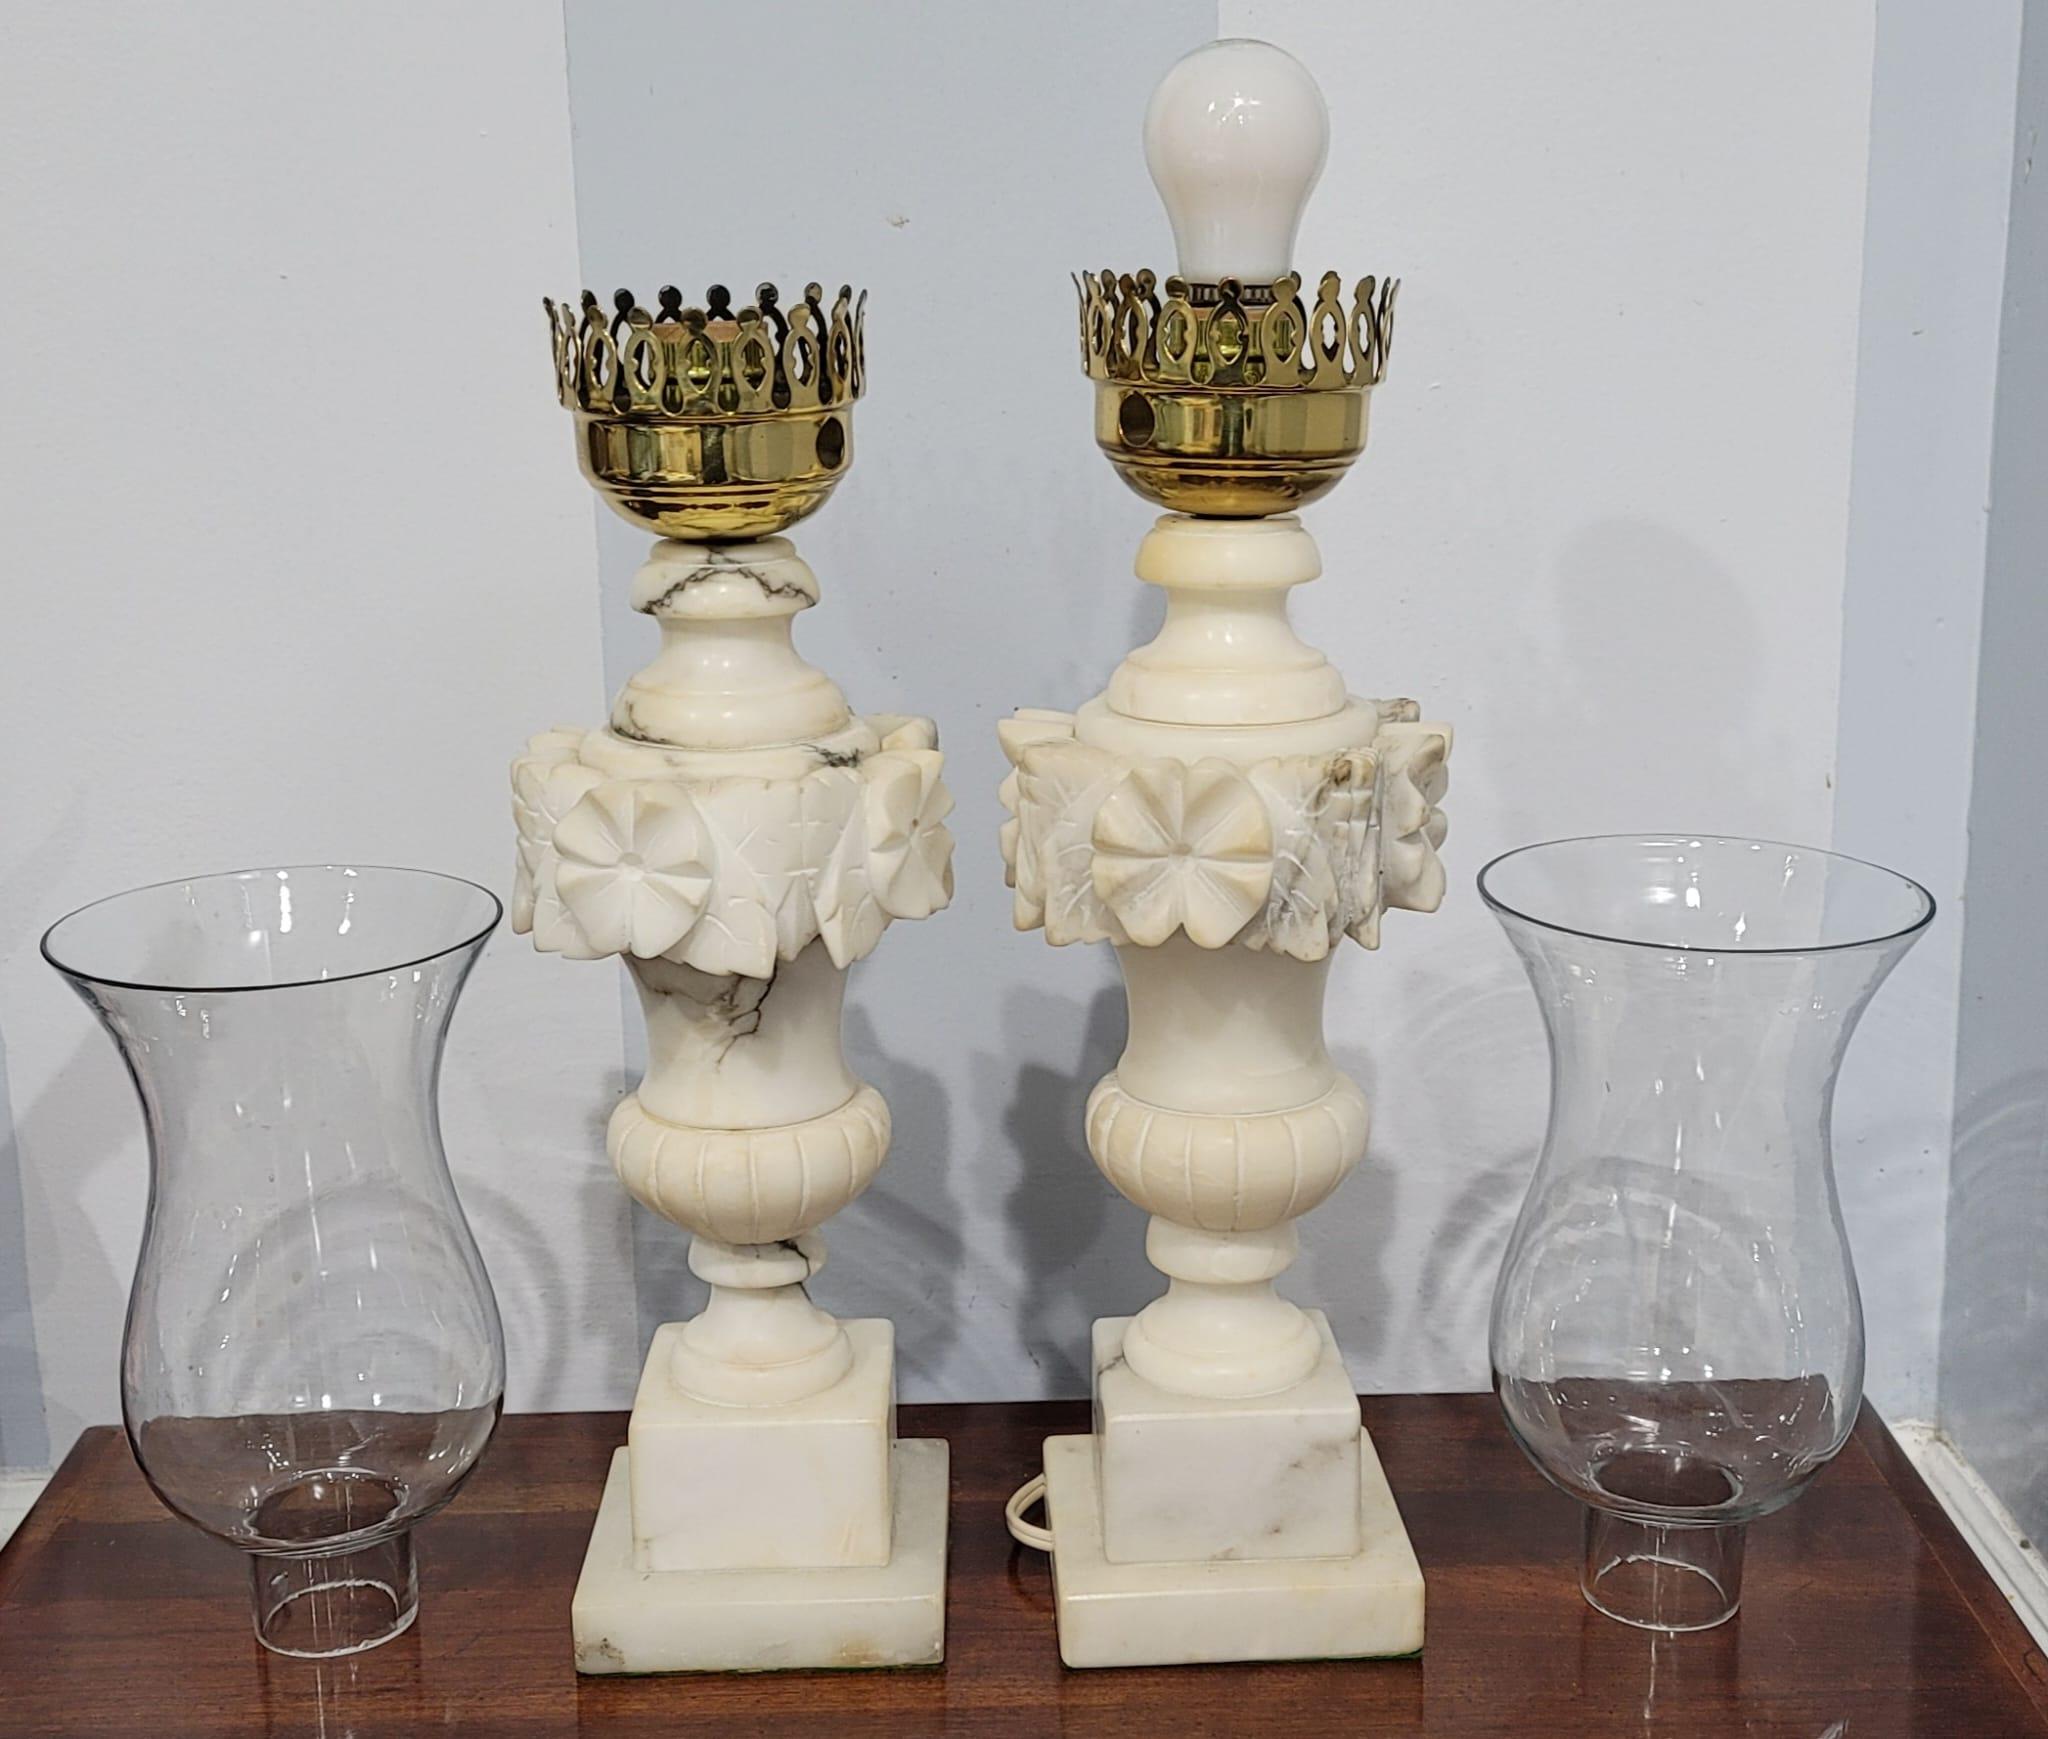 Pair of Vintage Italian Marble Lantern Table Lamps, Circa 1960s In Good Condition For Sale In Germantown, MD